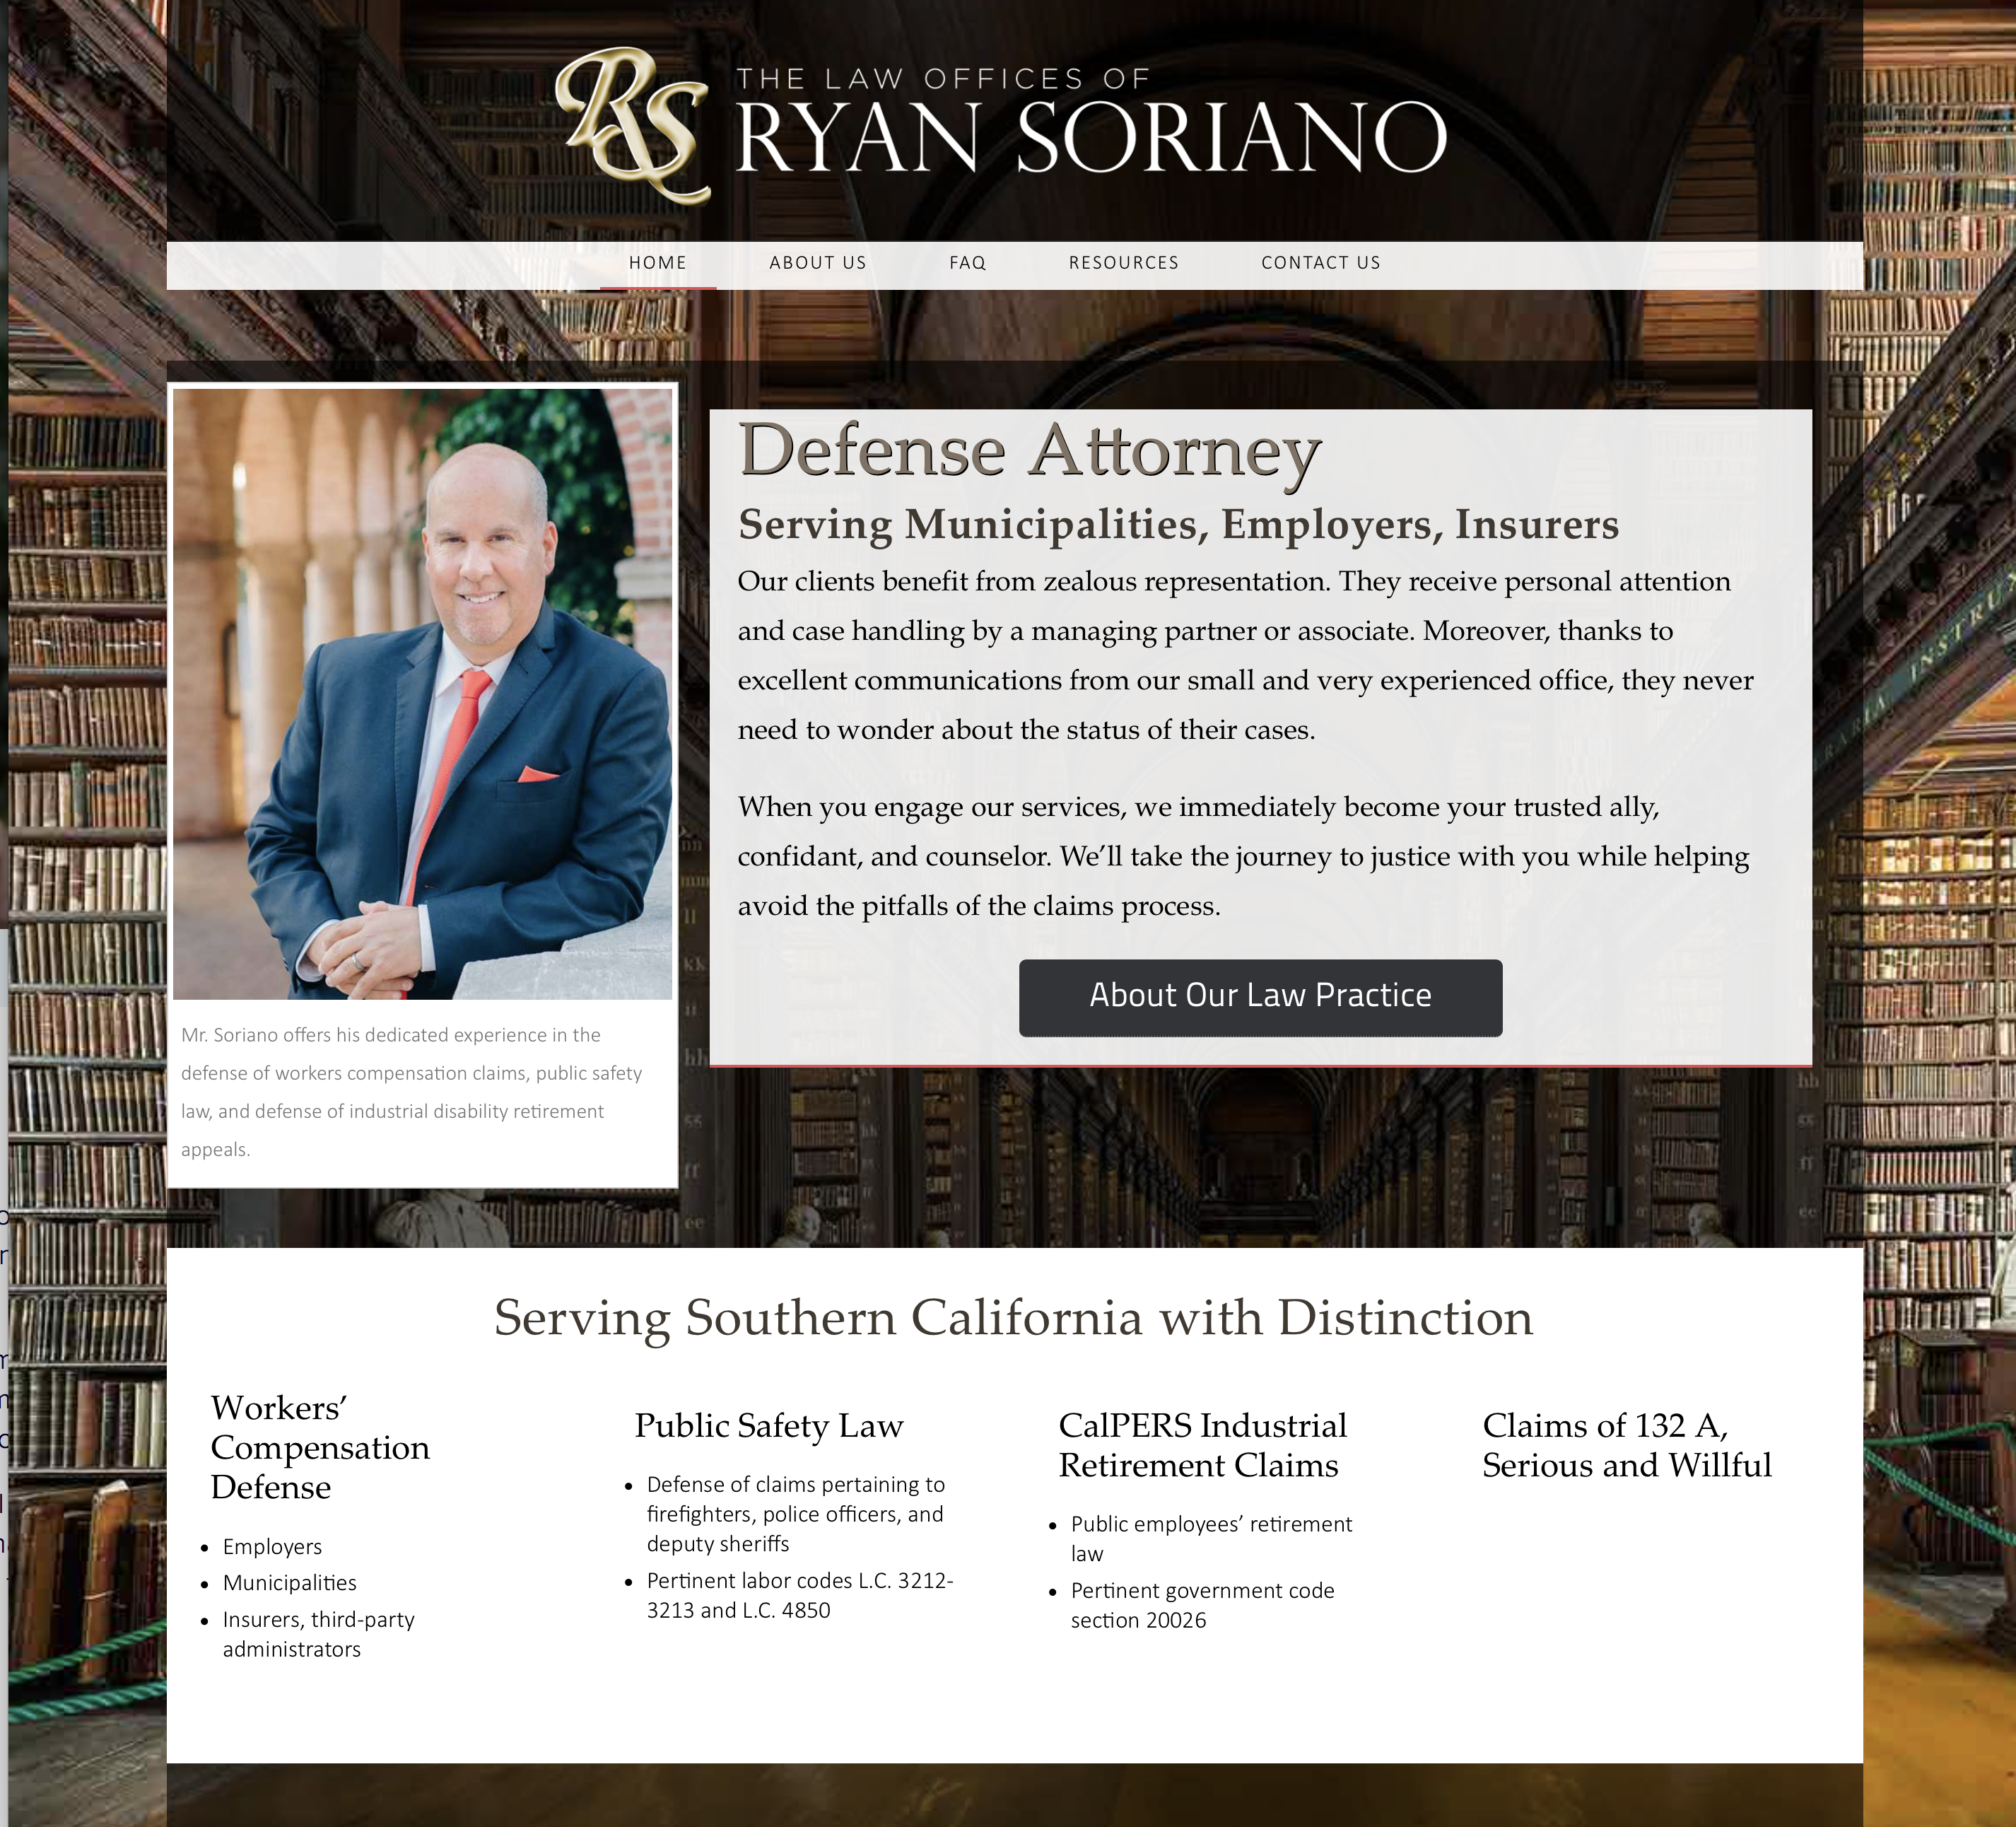 Design and development of web sites for lawyers, law firms, and paralegal services